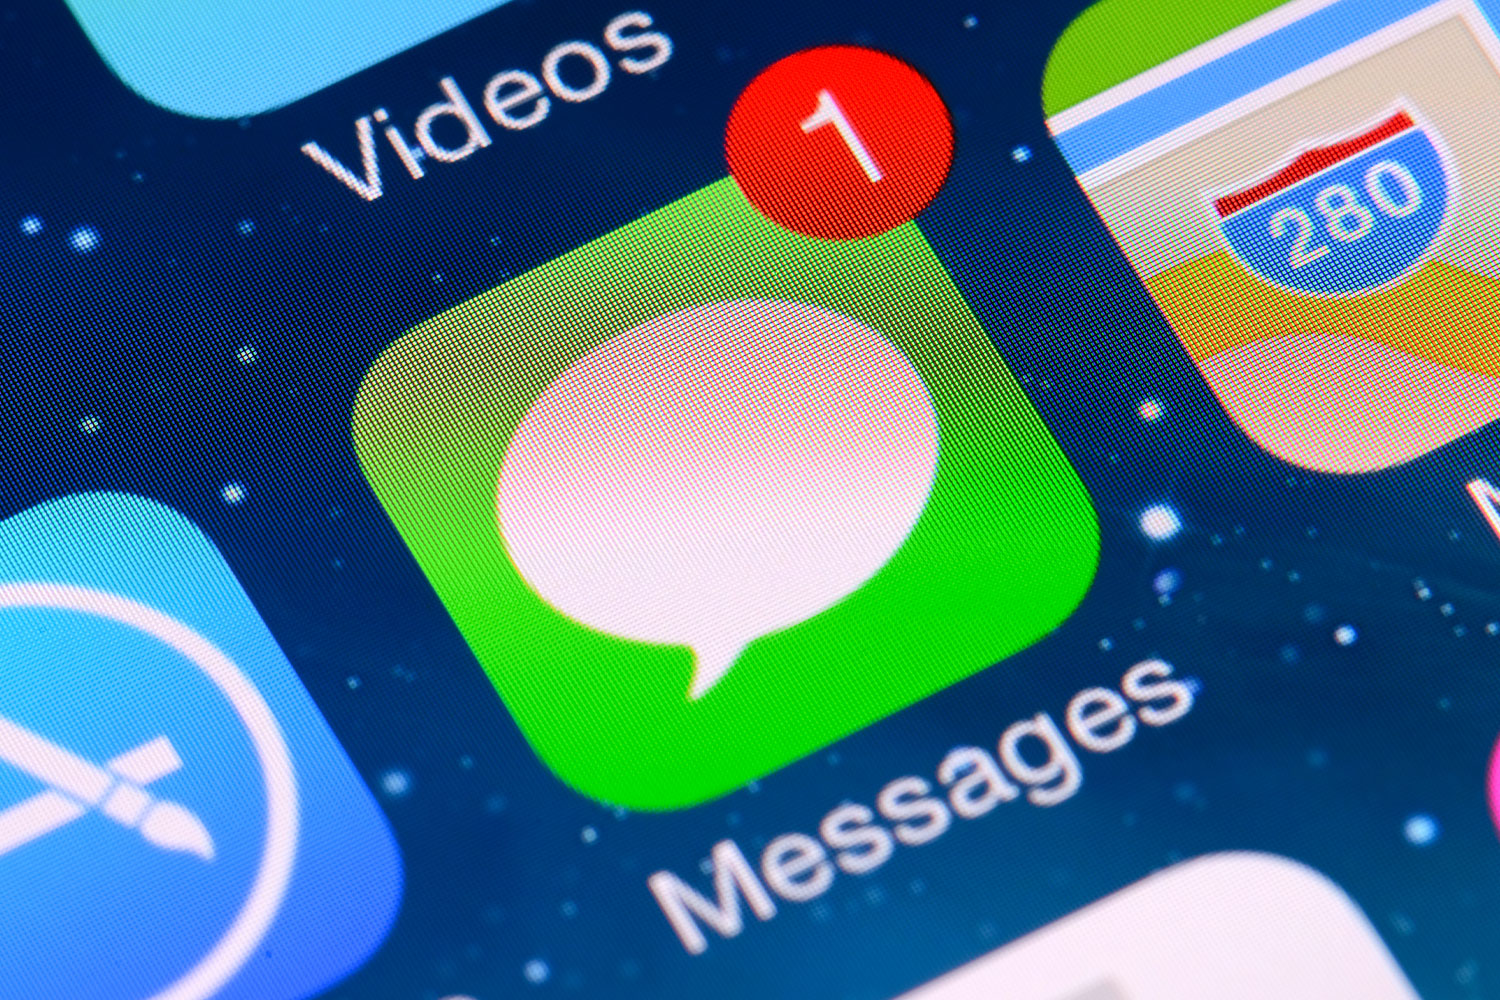 Apple finally unveils big iMessage upgrade with eight new features that makes texting Android owners way better [Video]